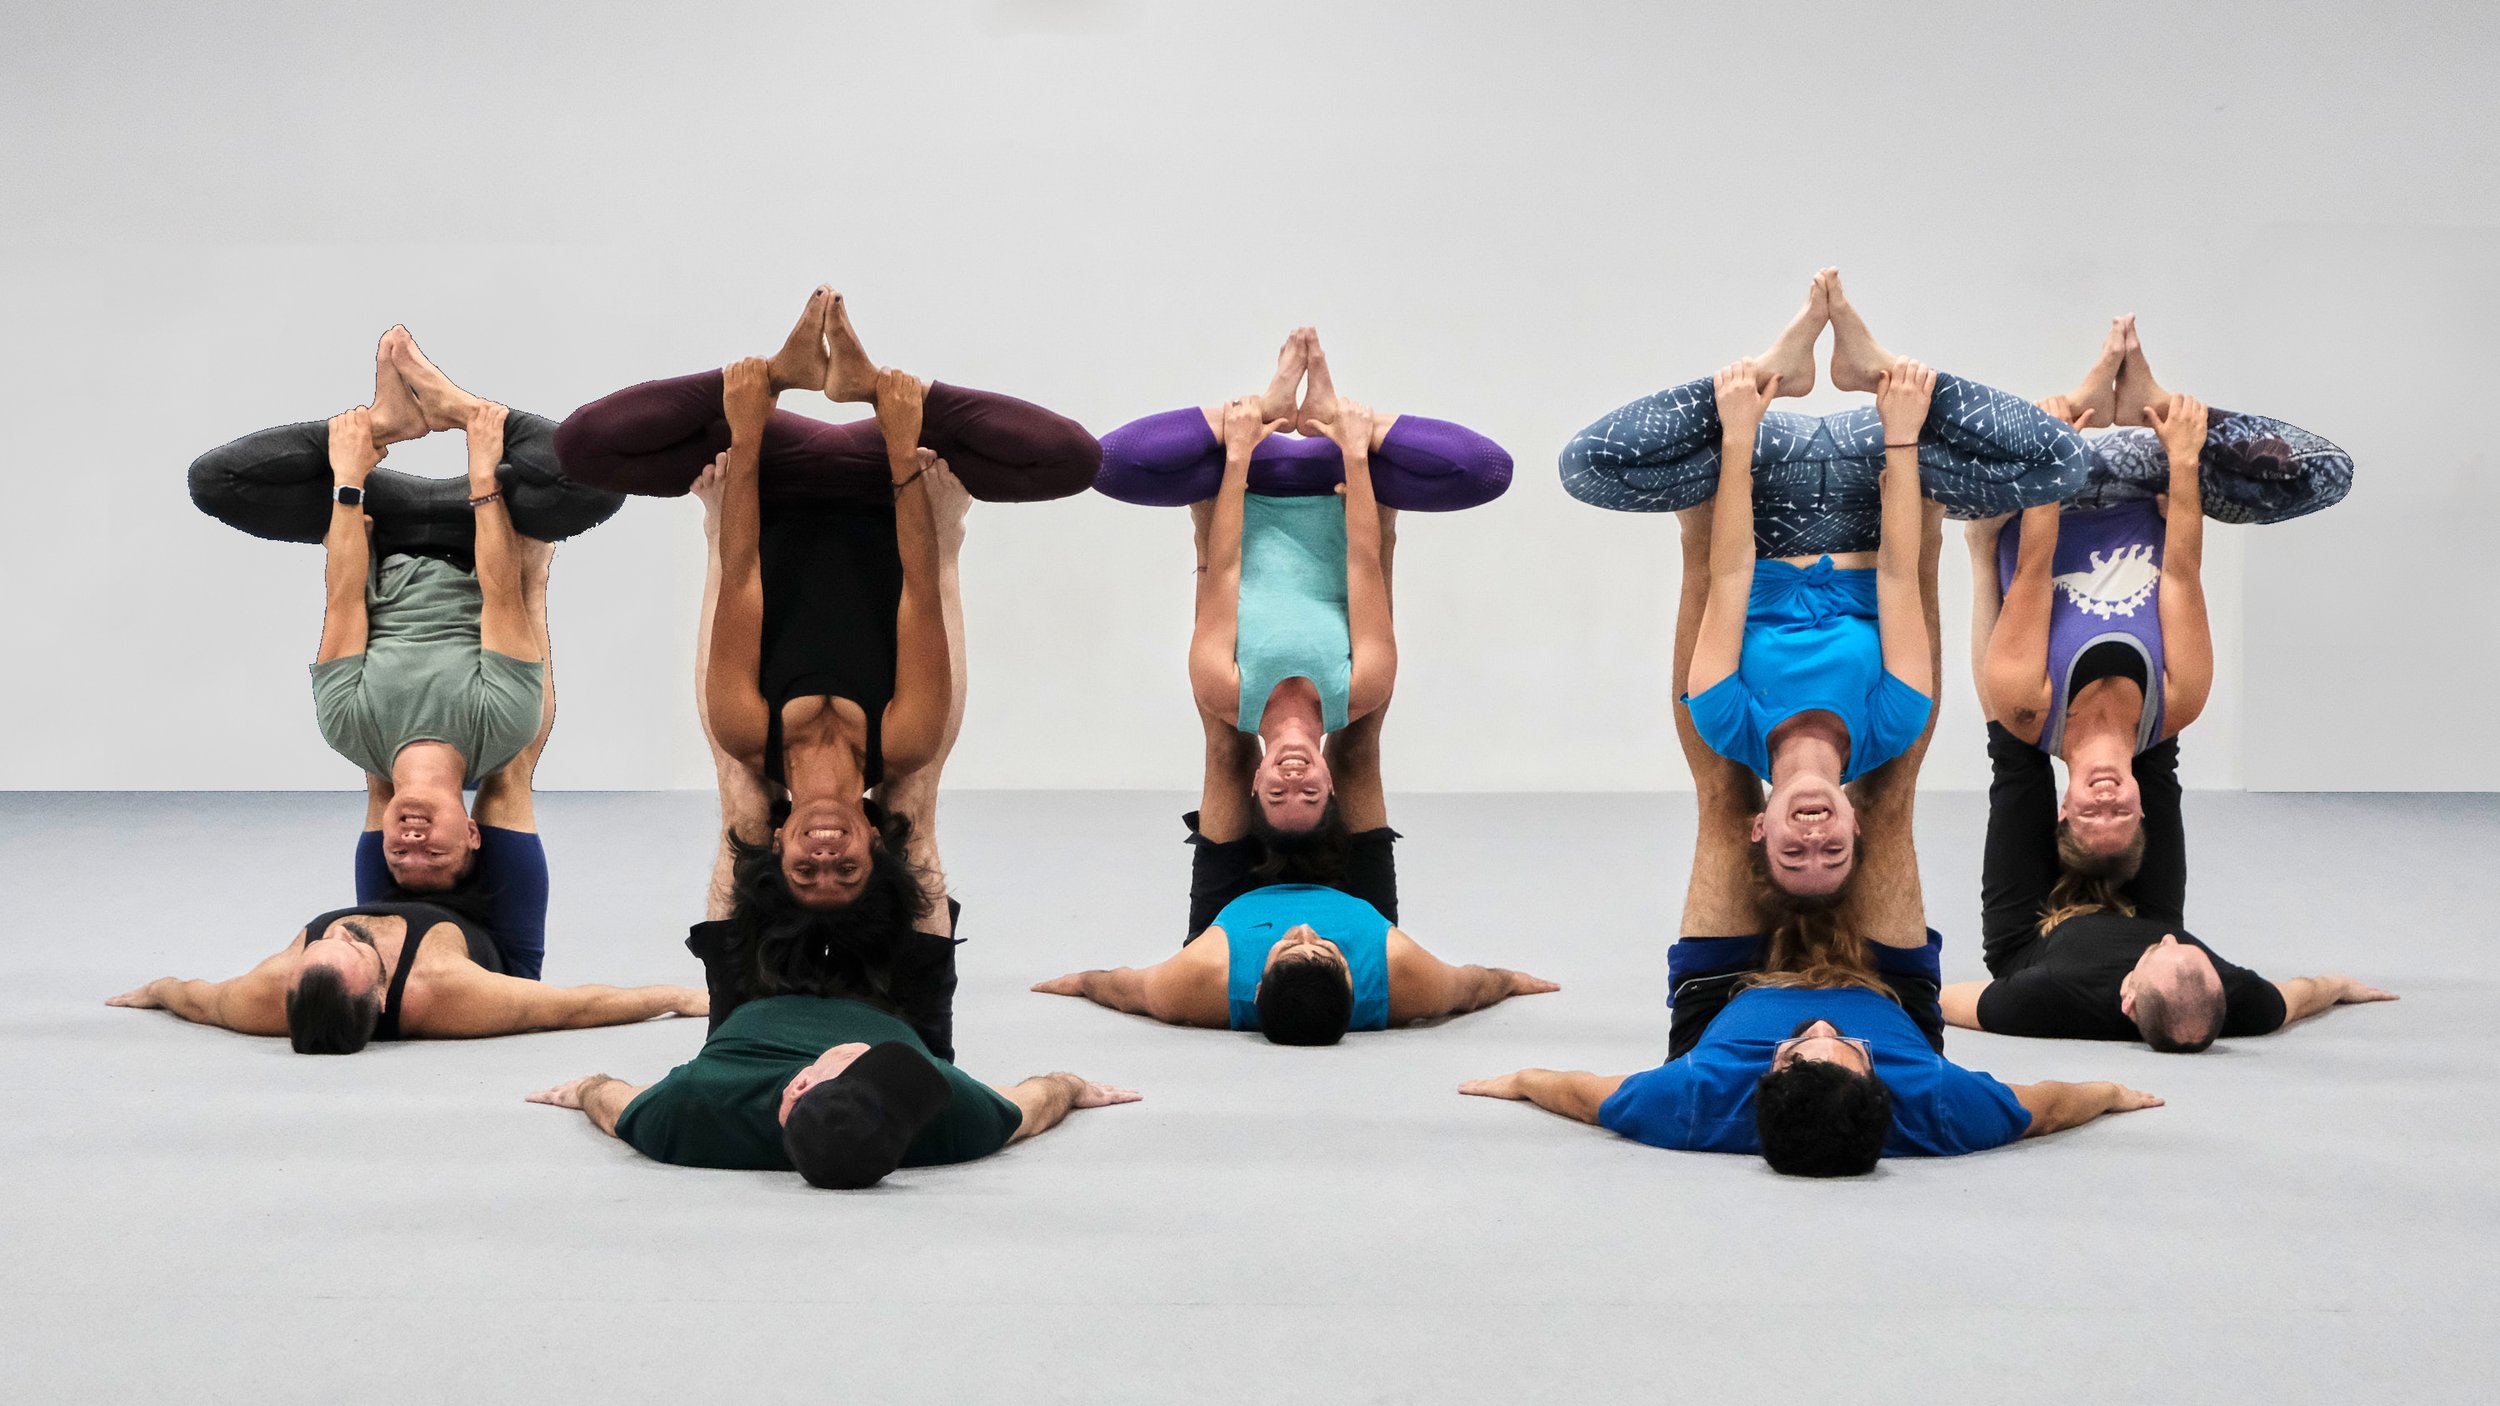 Acro Yoga Performance Duo for Hire in Austin